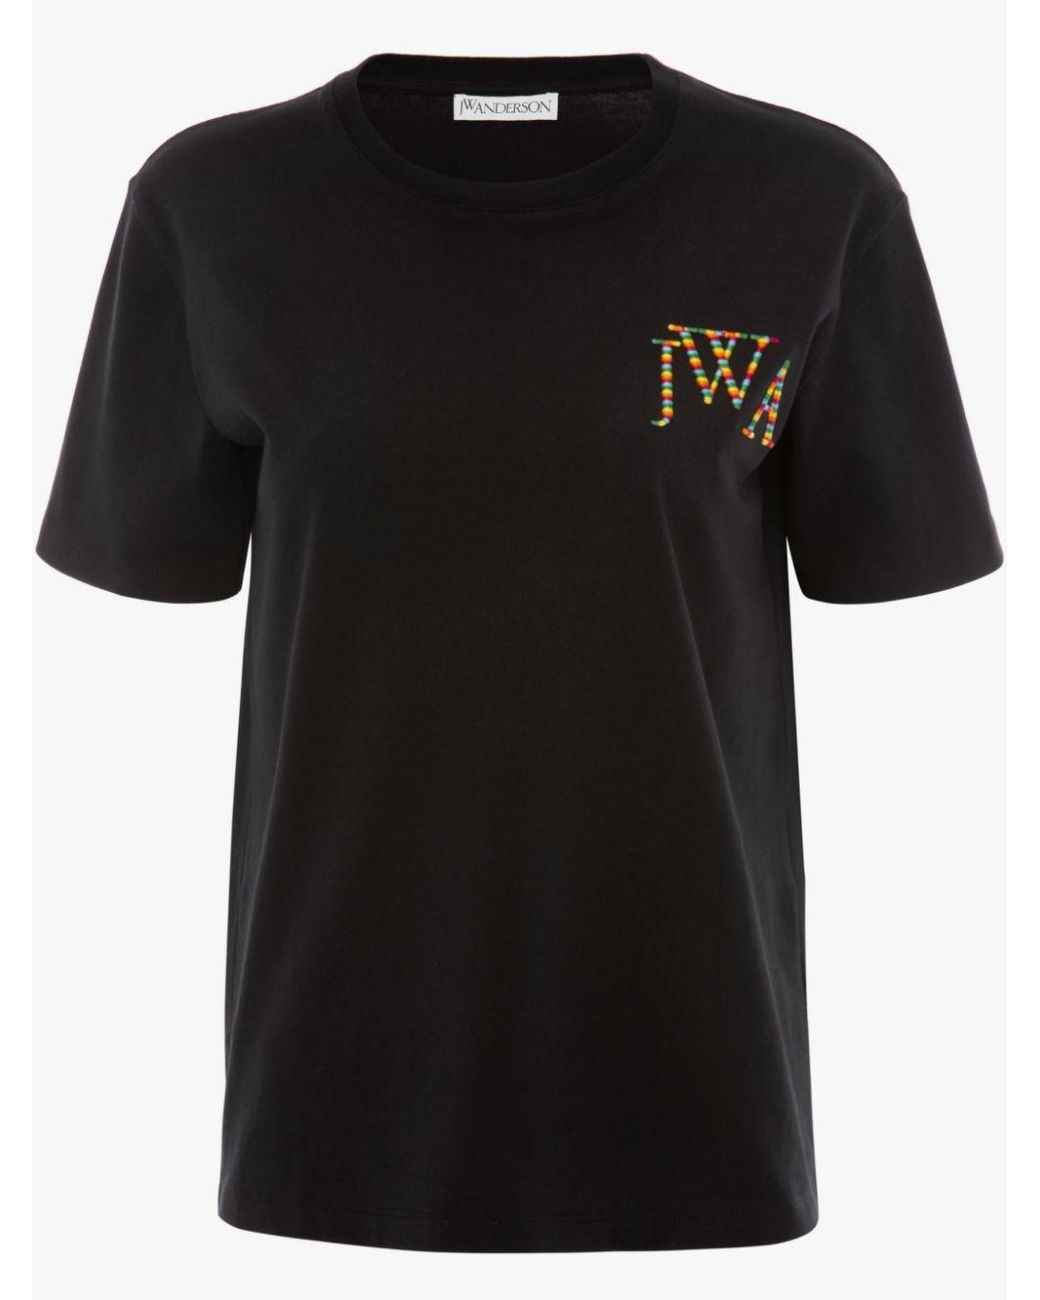 JW Anderson Embroidered Logo T-shirt in Black - Lyst